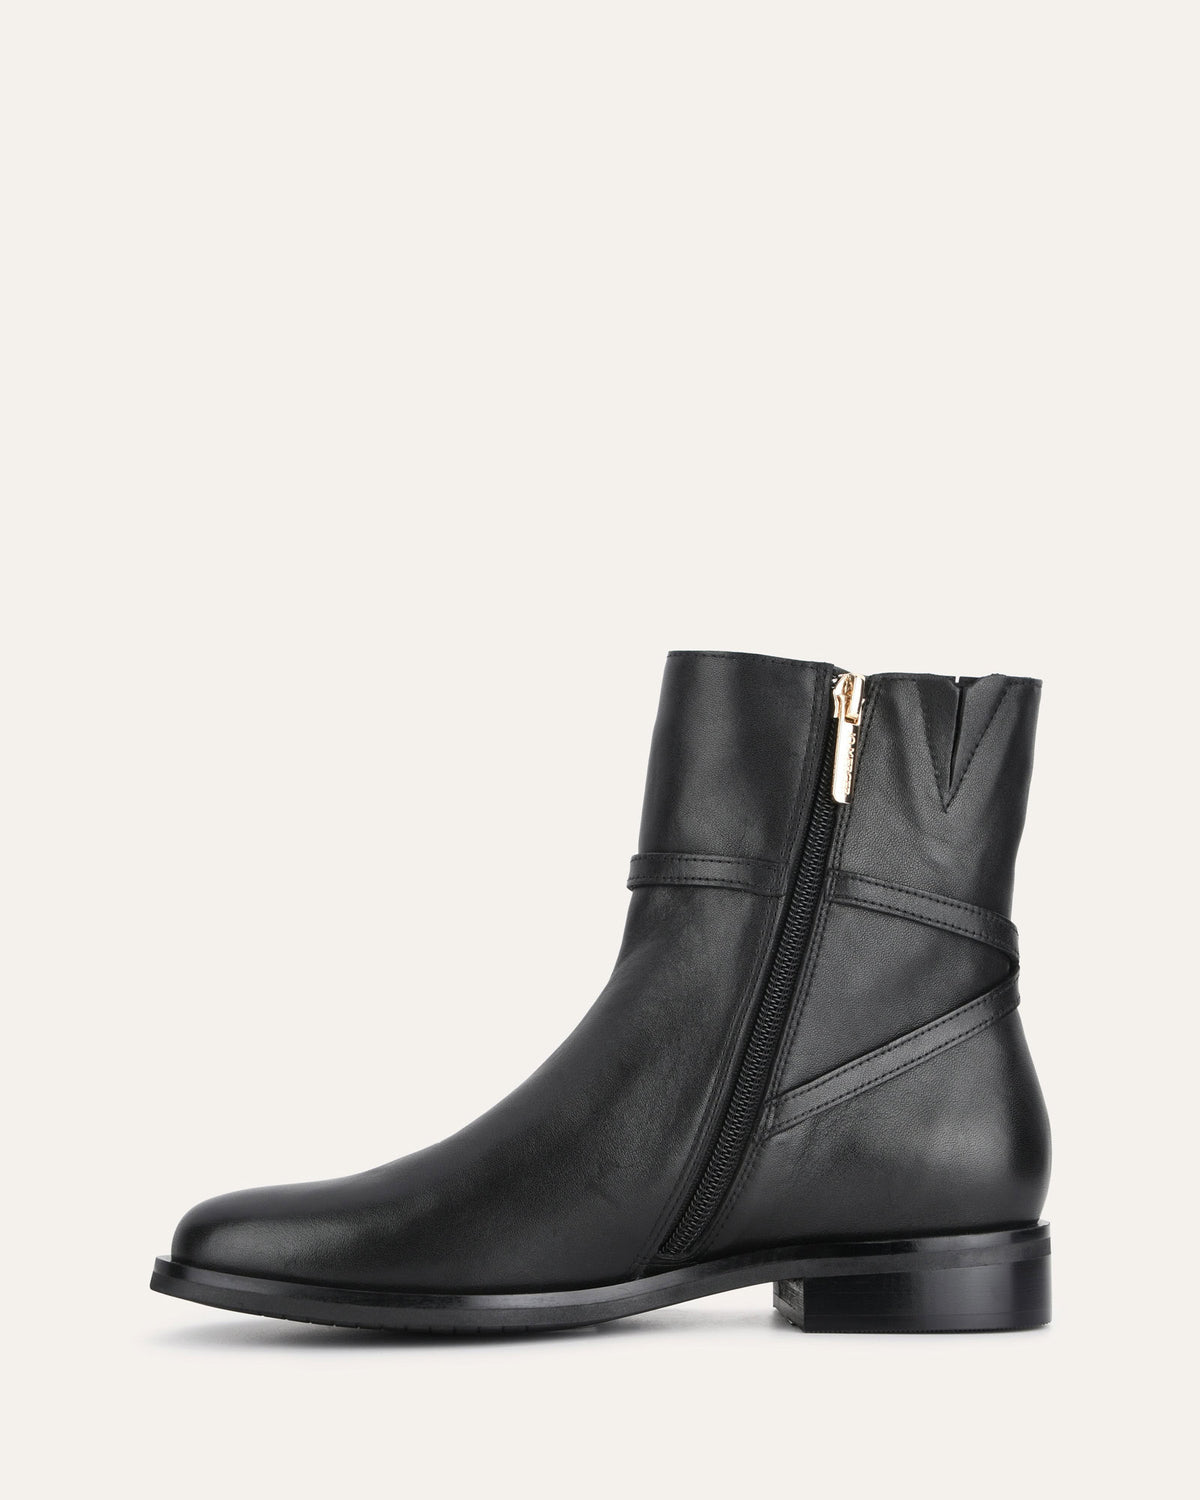 GILBERT FLAT ANKLE BOOTS BLACK LEATHER